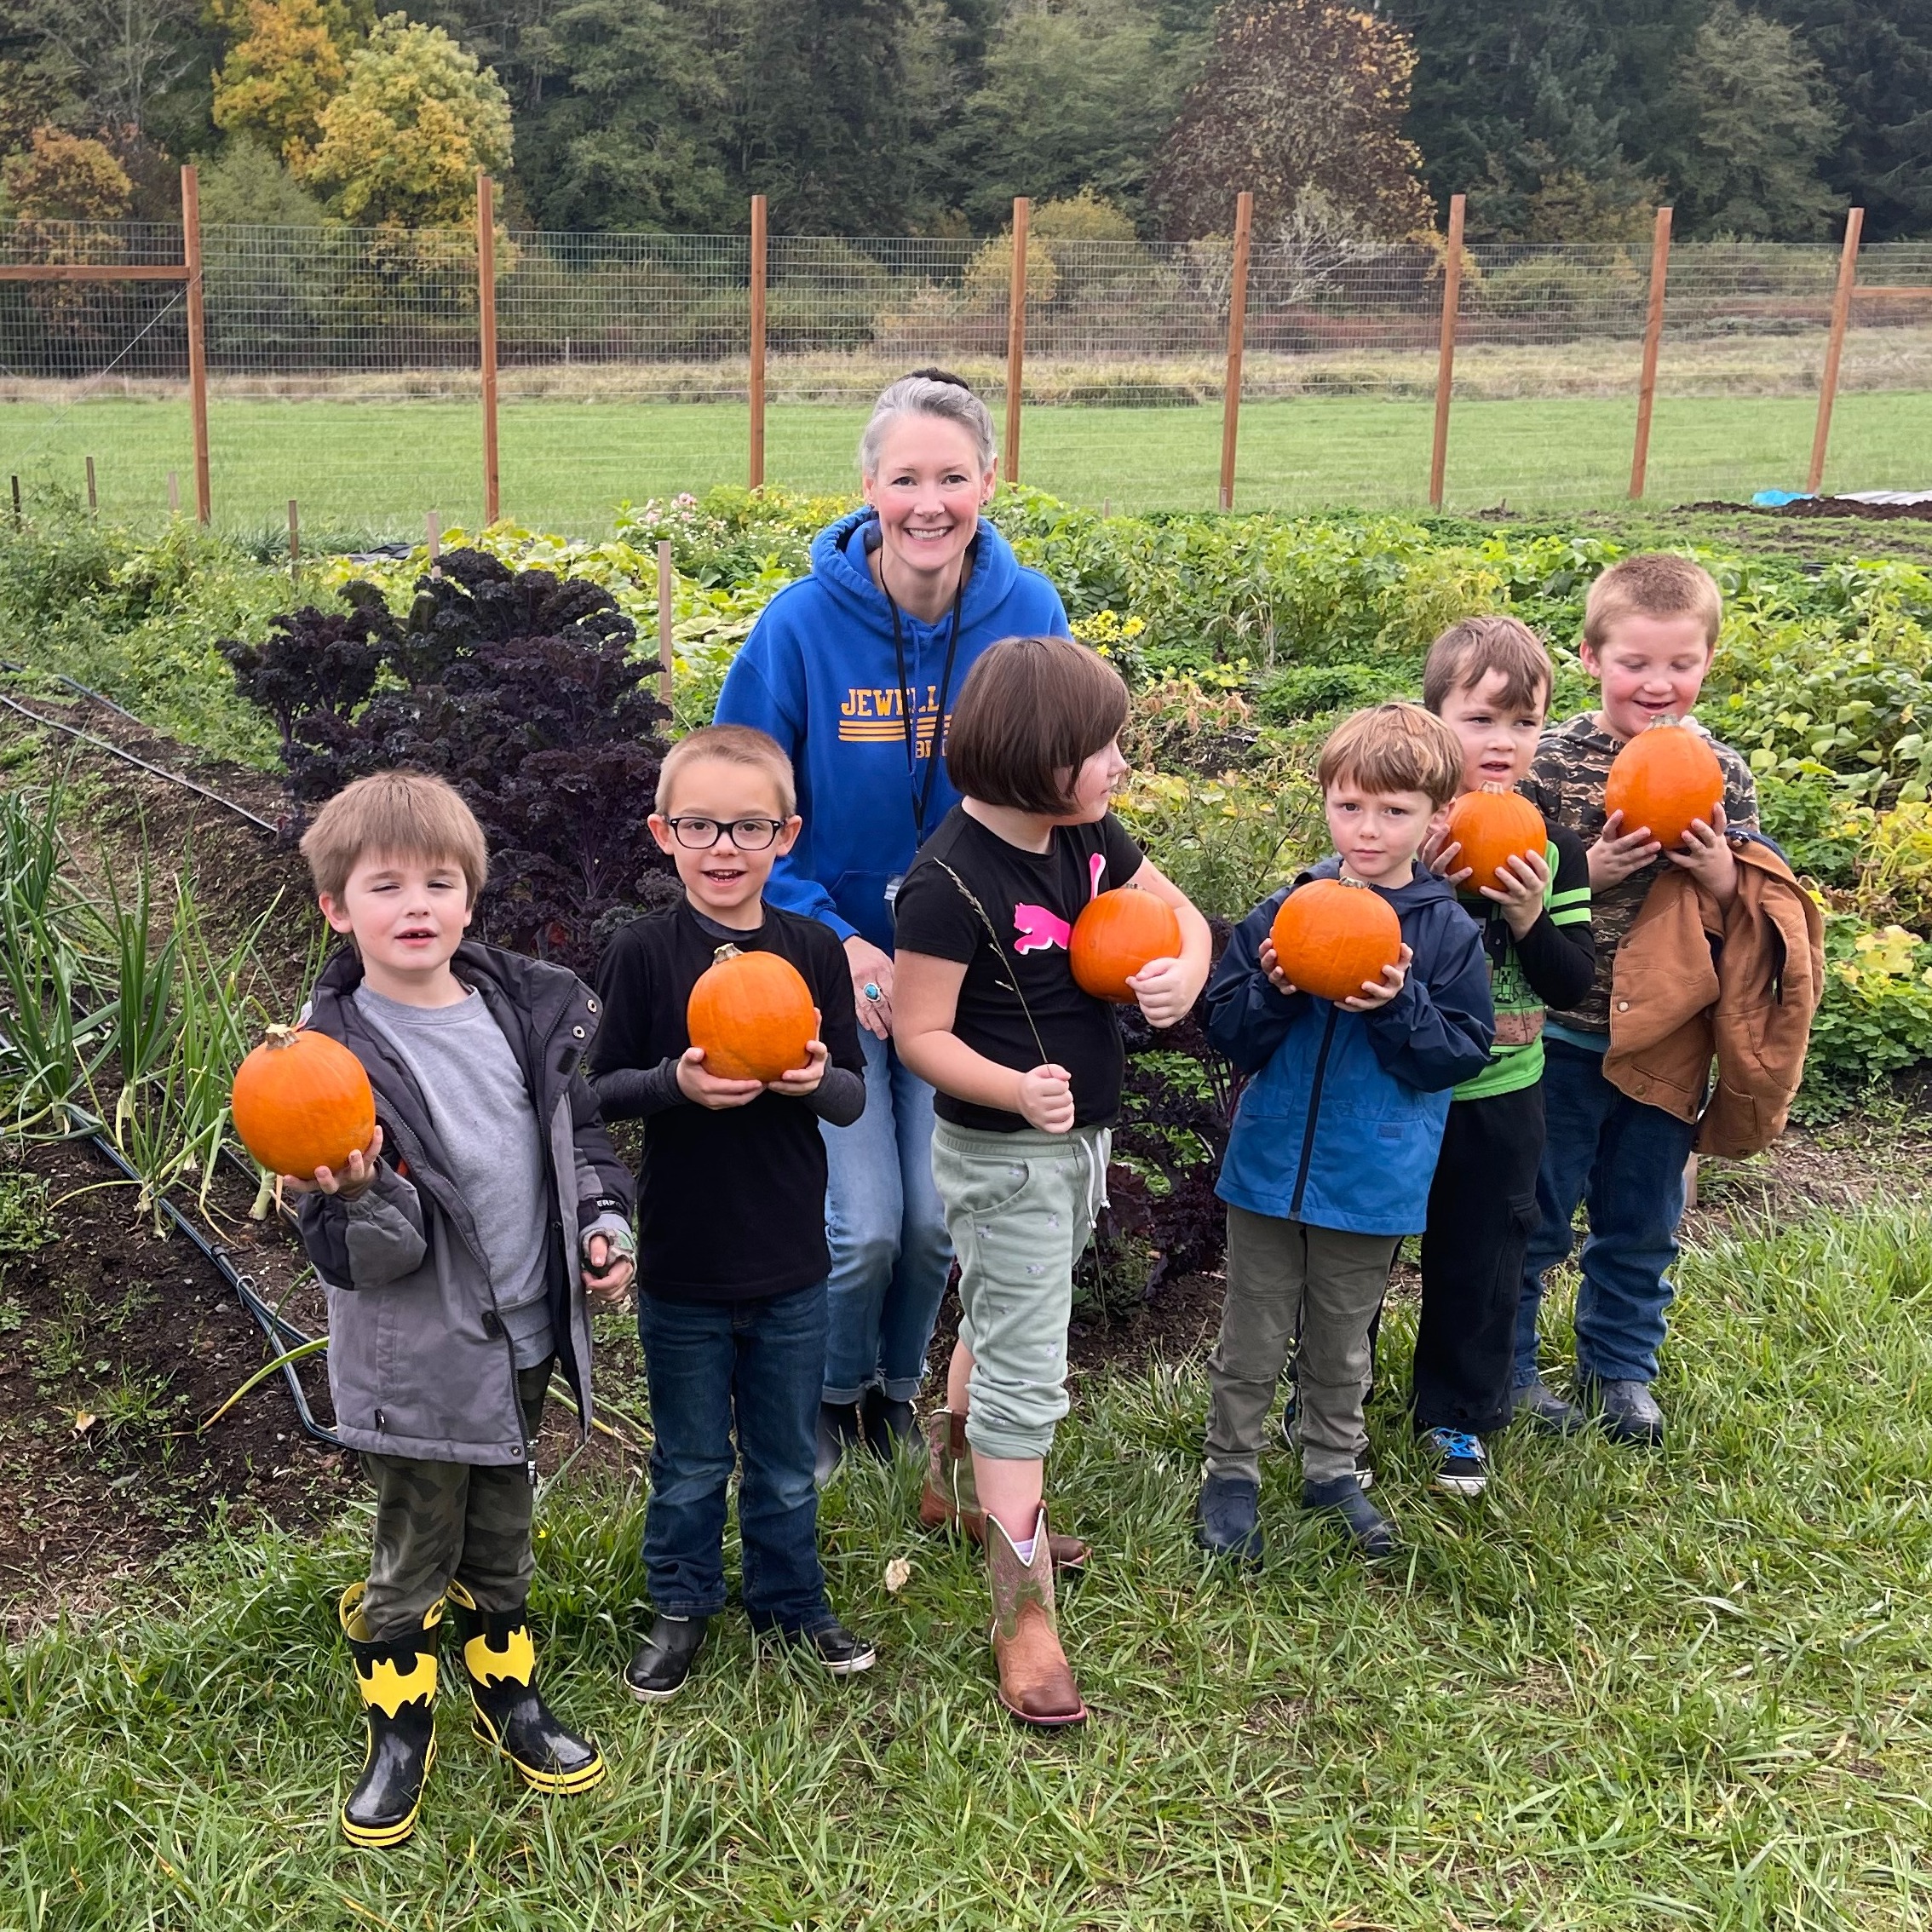 Six students with their teacher holding small orange pumpkins that they picked.